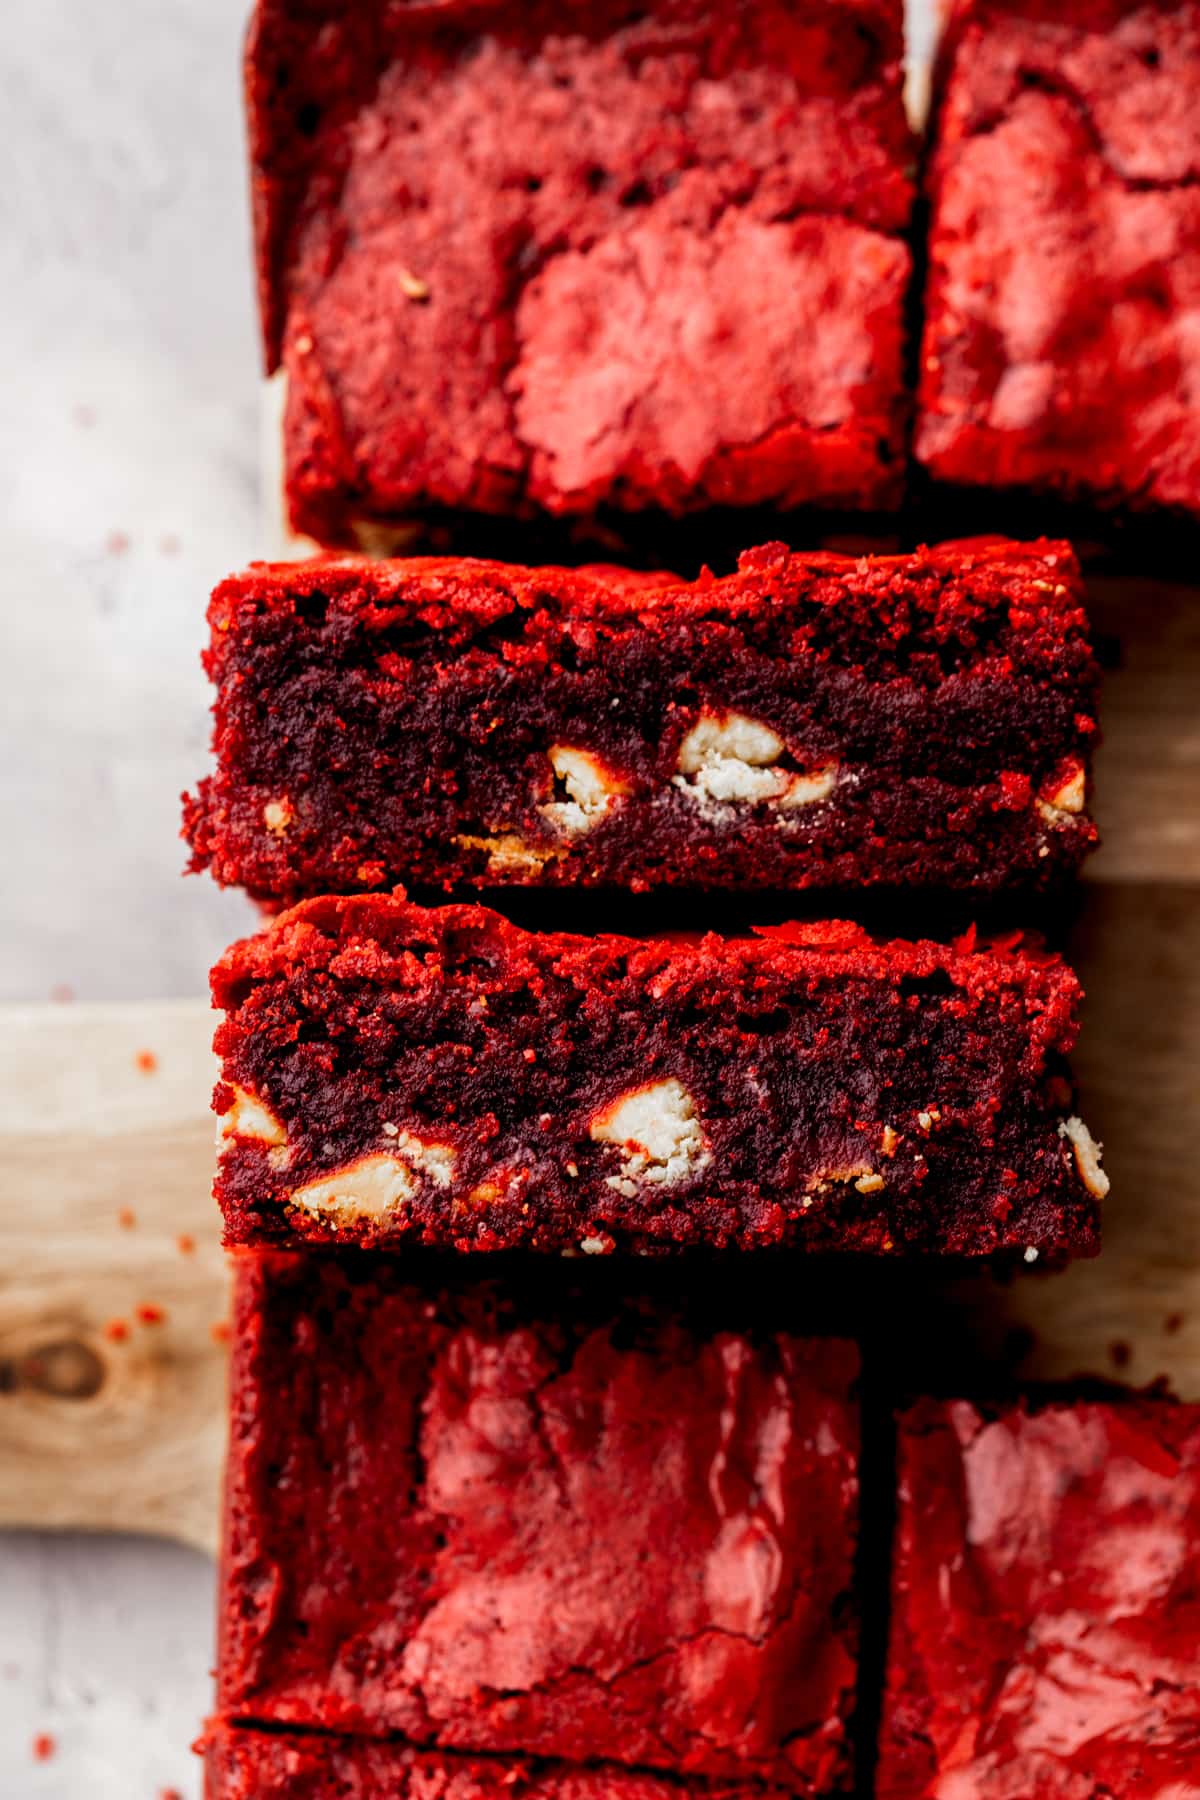 Two red velvet brownies on its side.